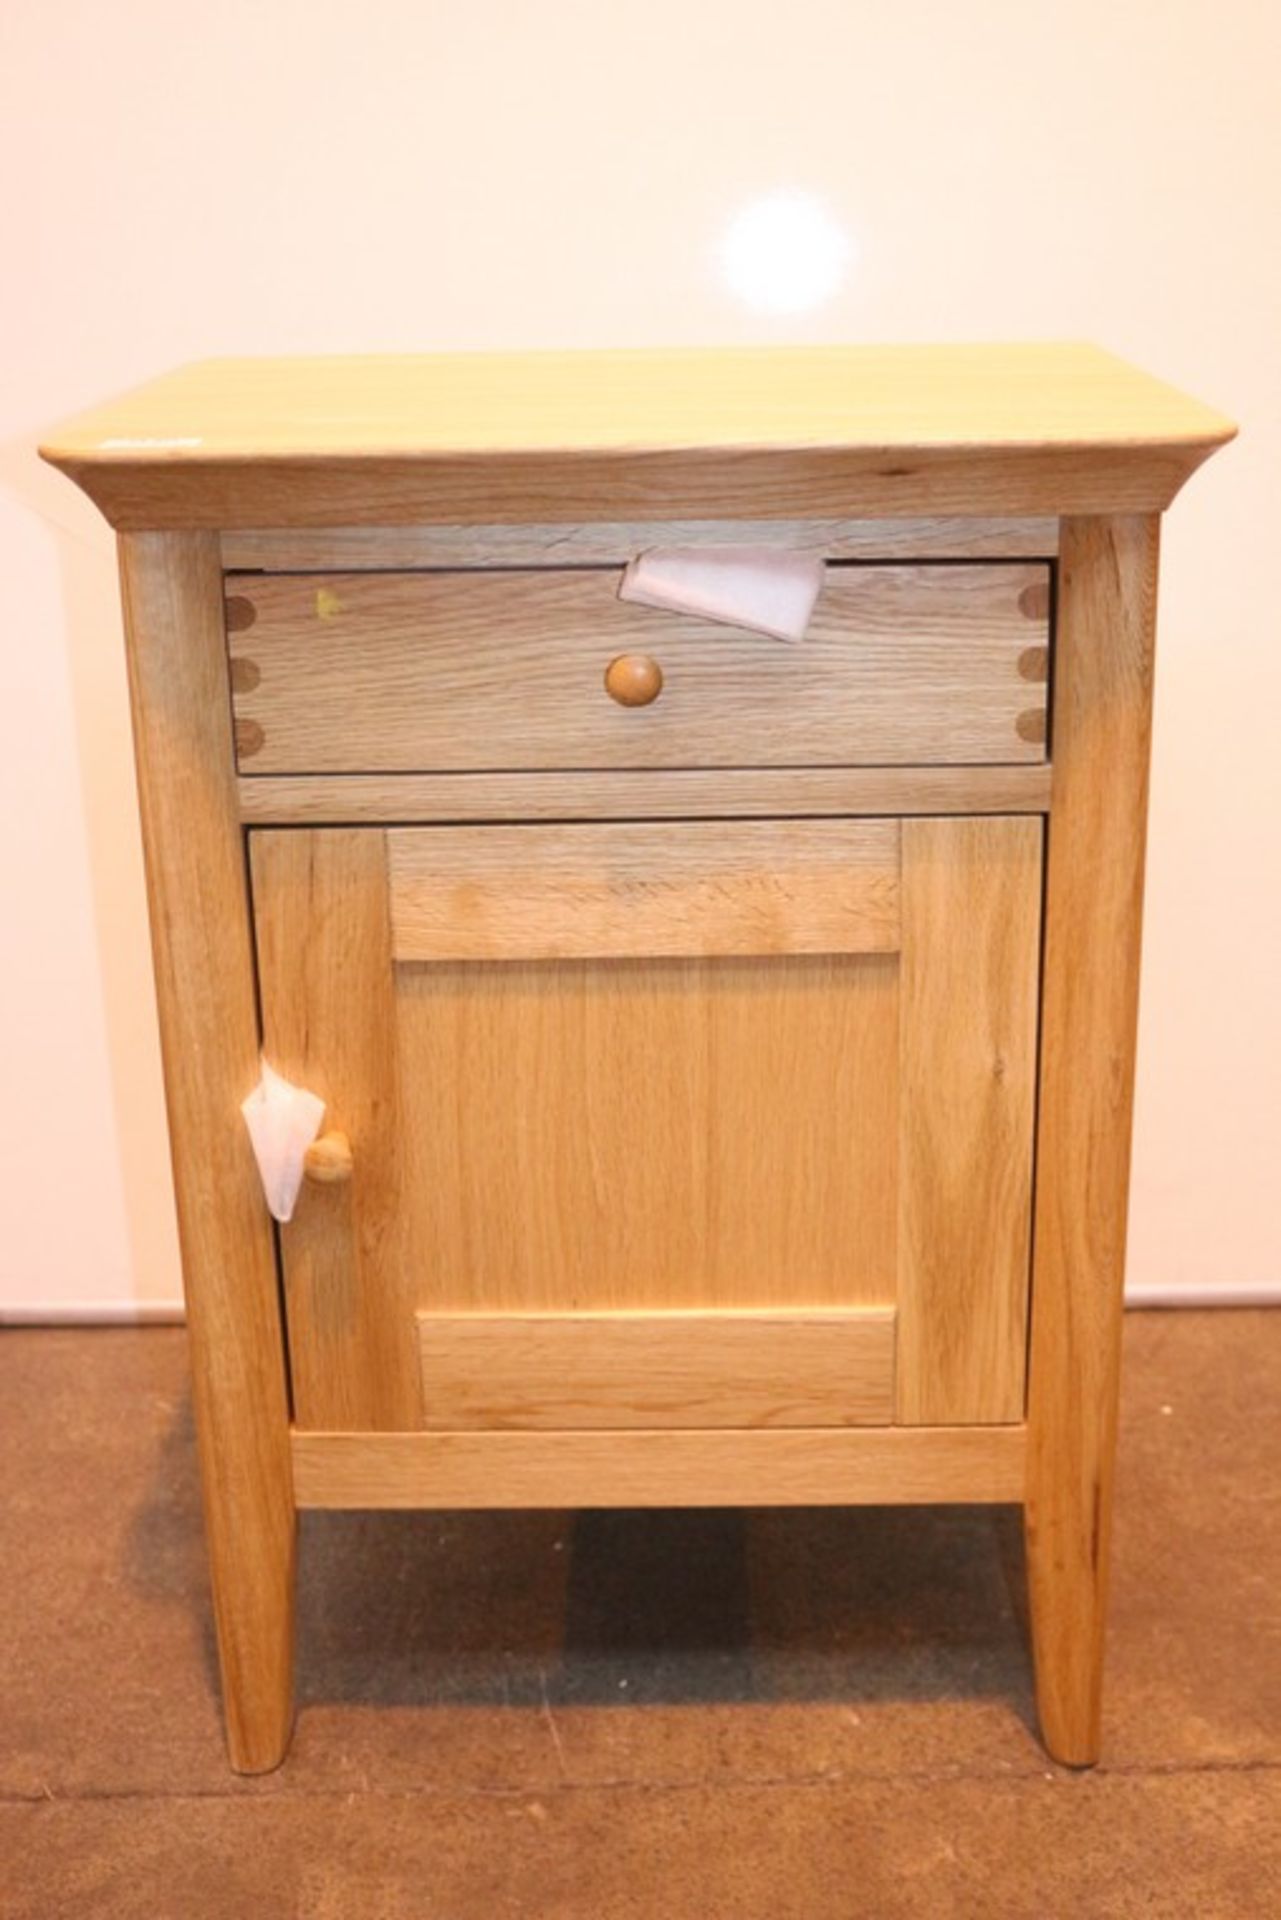 1 x BOXED ESSENCE SOLID LIGHT OAK 1 DRAWER 1 DOOR SIDE TABLE (NC) RRP £275 *PLEASE NOTE THAT THE BID